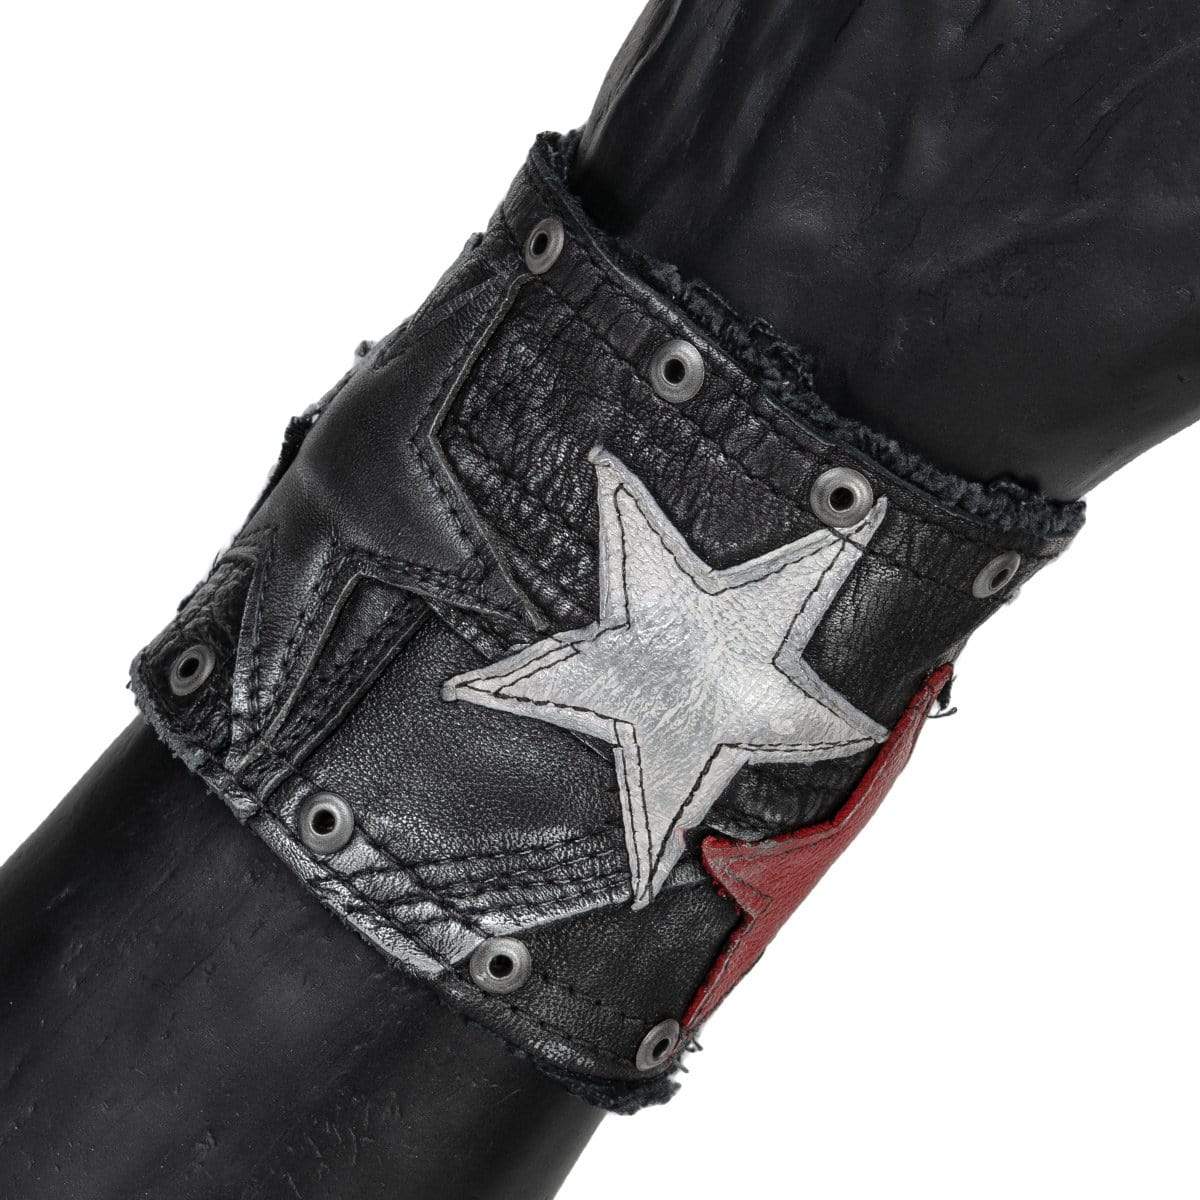 • Wornstar Custom Stage Wear Collection• Custom leather wrist band• Completely hand-made • Designed, made, and sold exclusively by Wornstar Clothing• Individually made; each one will vary slightly• Made with soft leather• Lined with fabric for comfort• Hand-studded detail• Hand-painted• Hand-distressed•